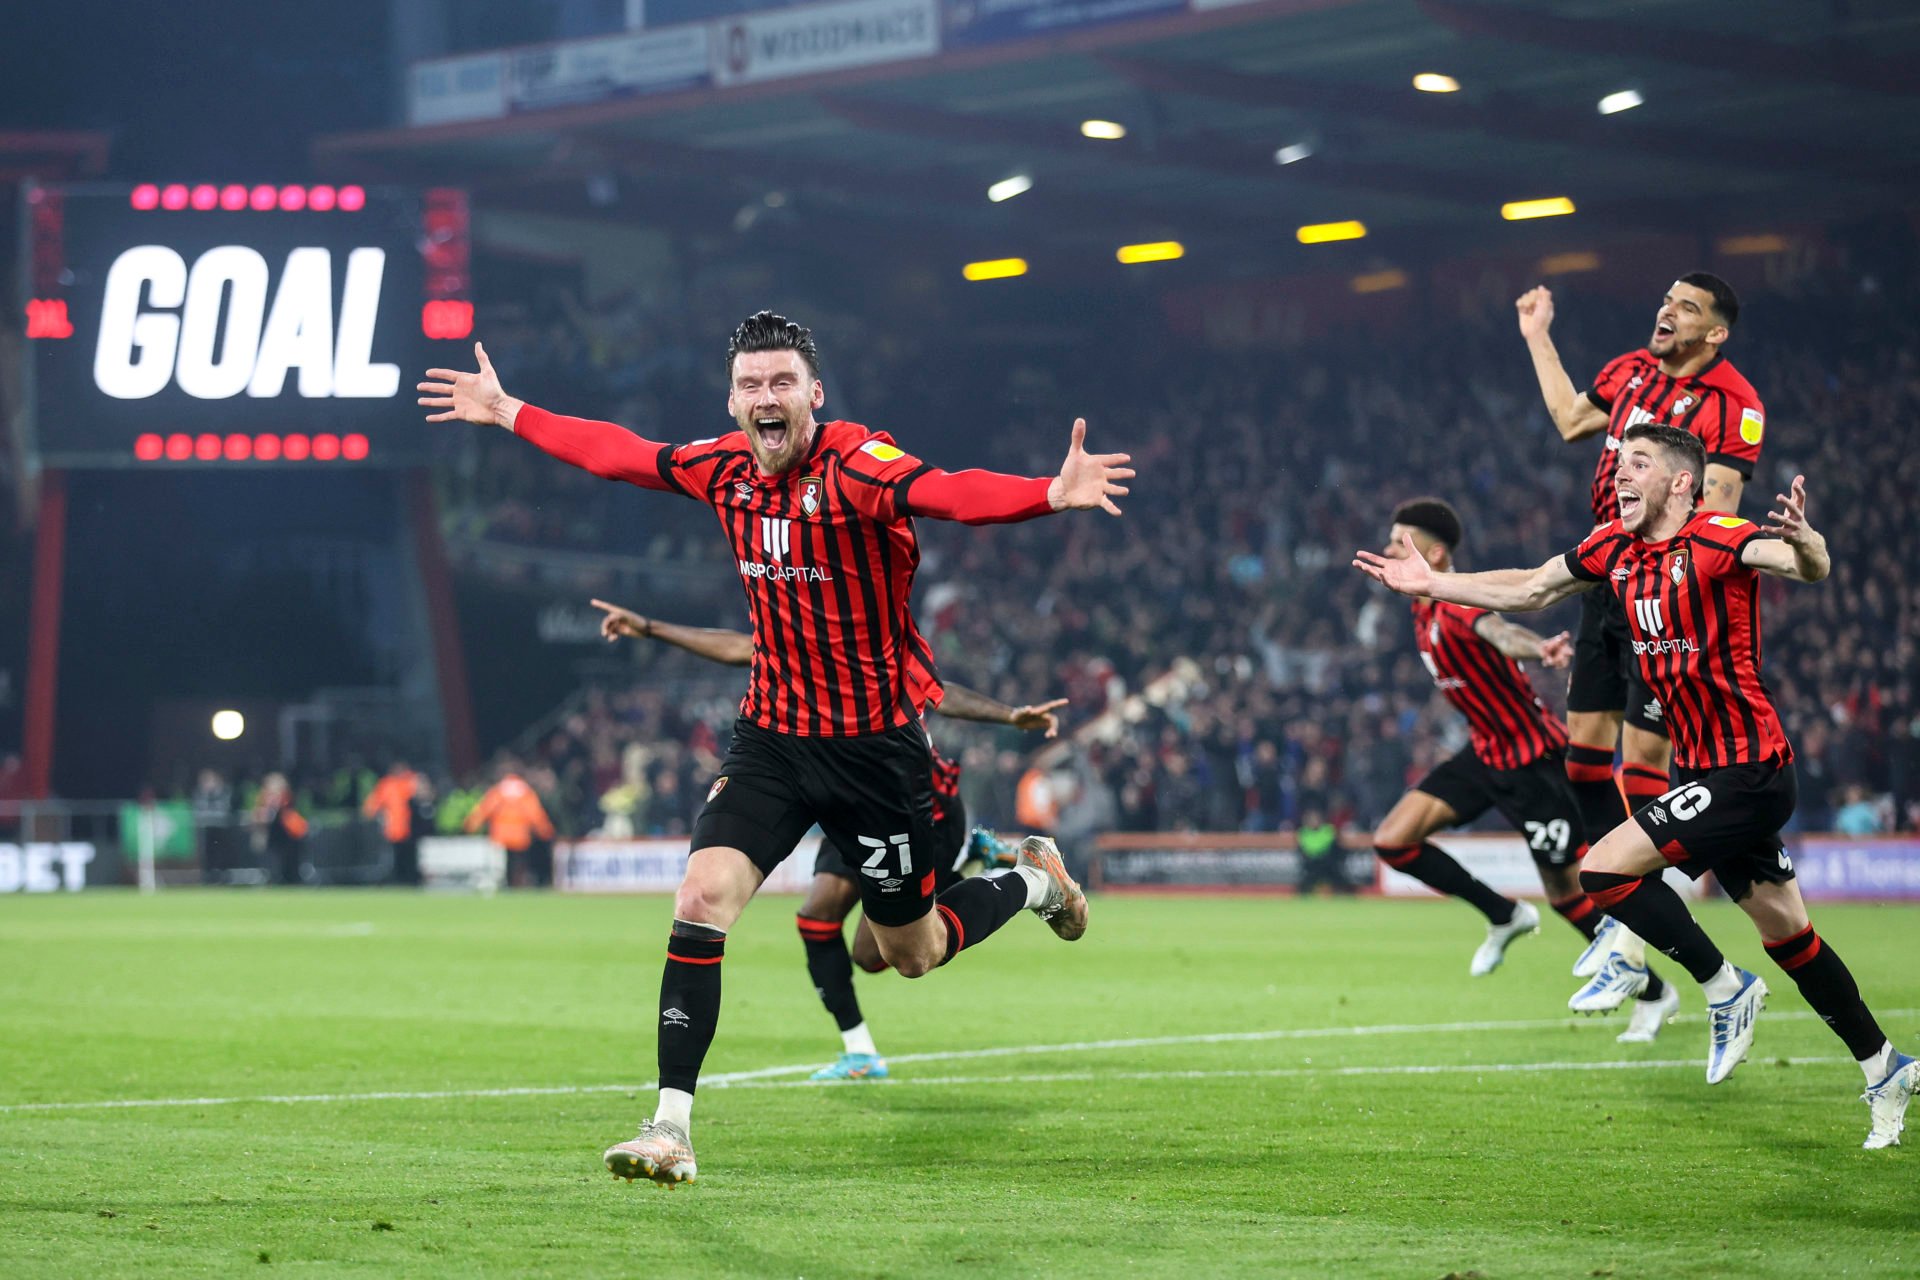  Kieffer Moore, a 6'5" striker from Wales, celebrates scoring a goal for his club, AFC Bournemouth.